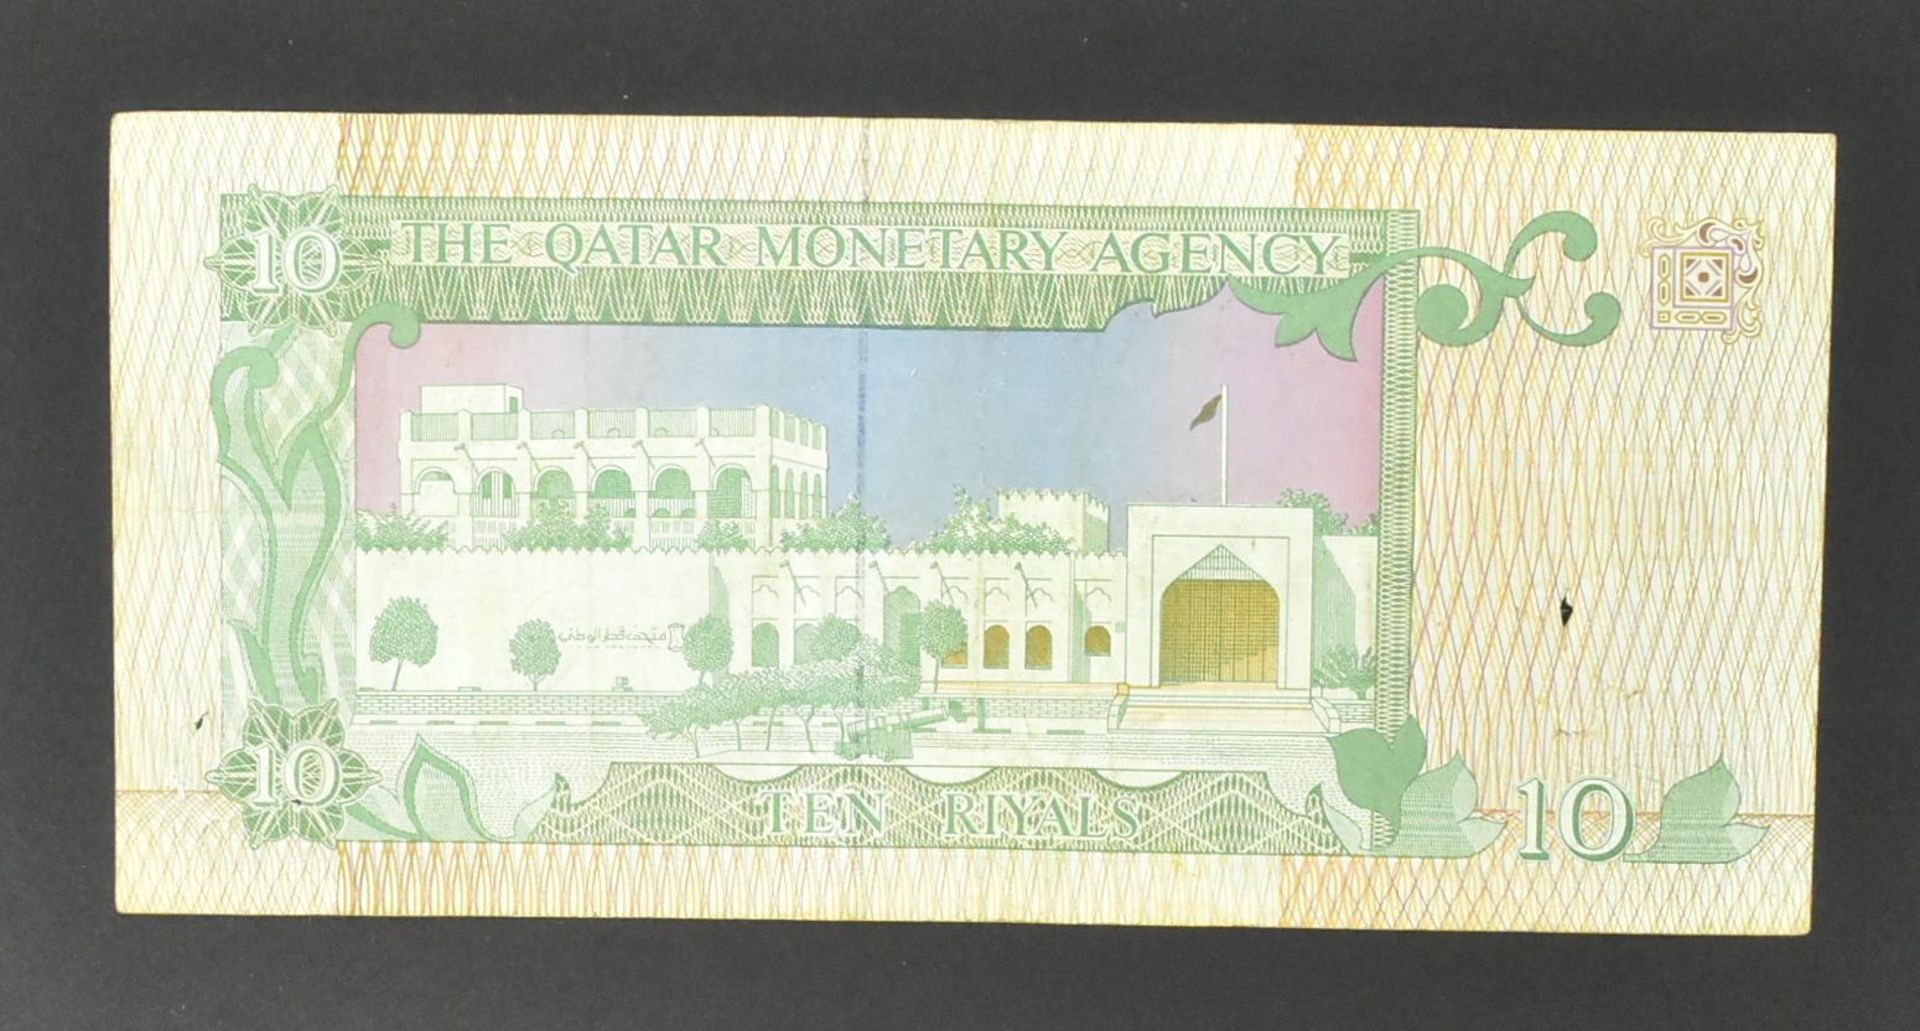 COLLECTION OF INTERNATIONAL UNCIRCULATED BANK NOTES - OMAN - Image 14 of 51